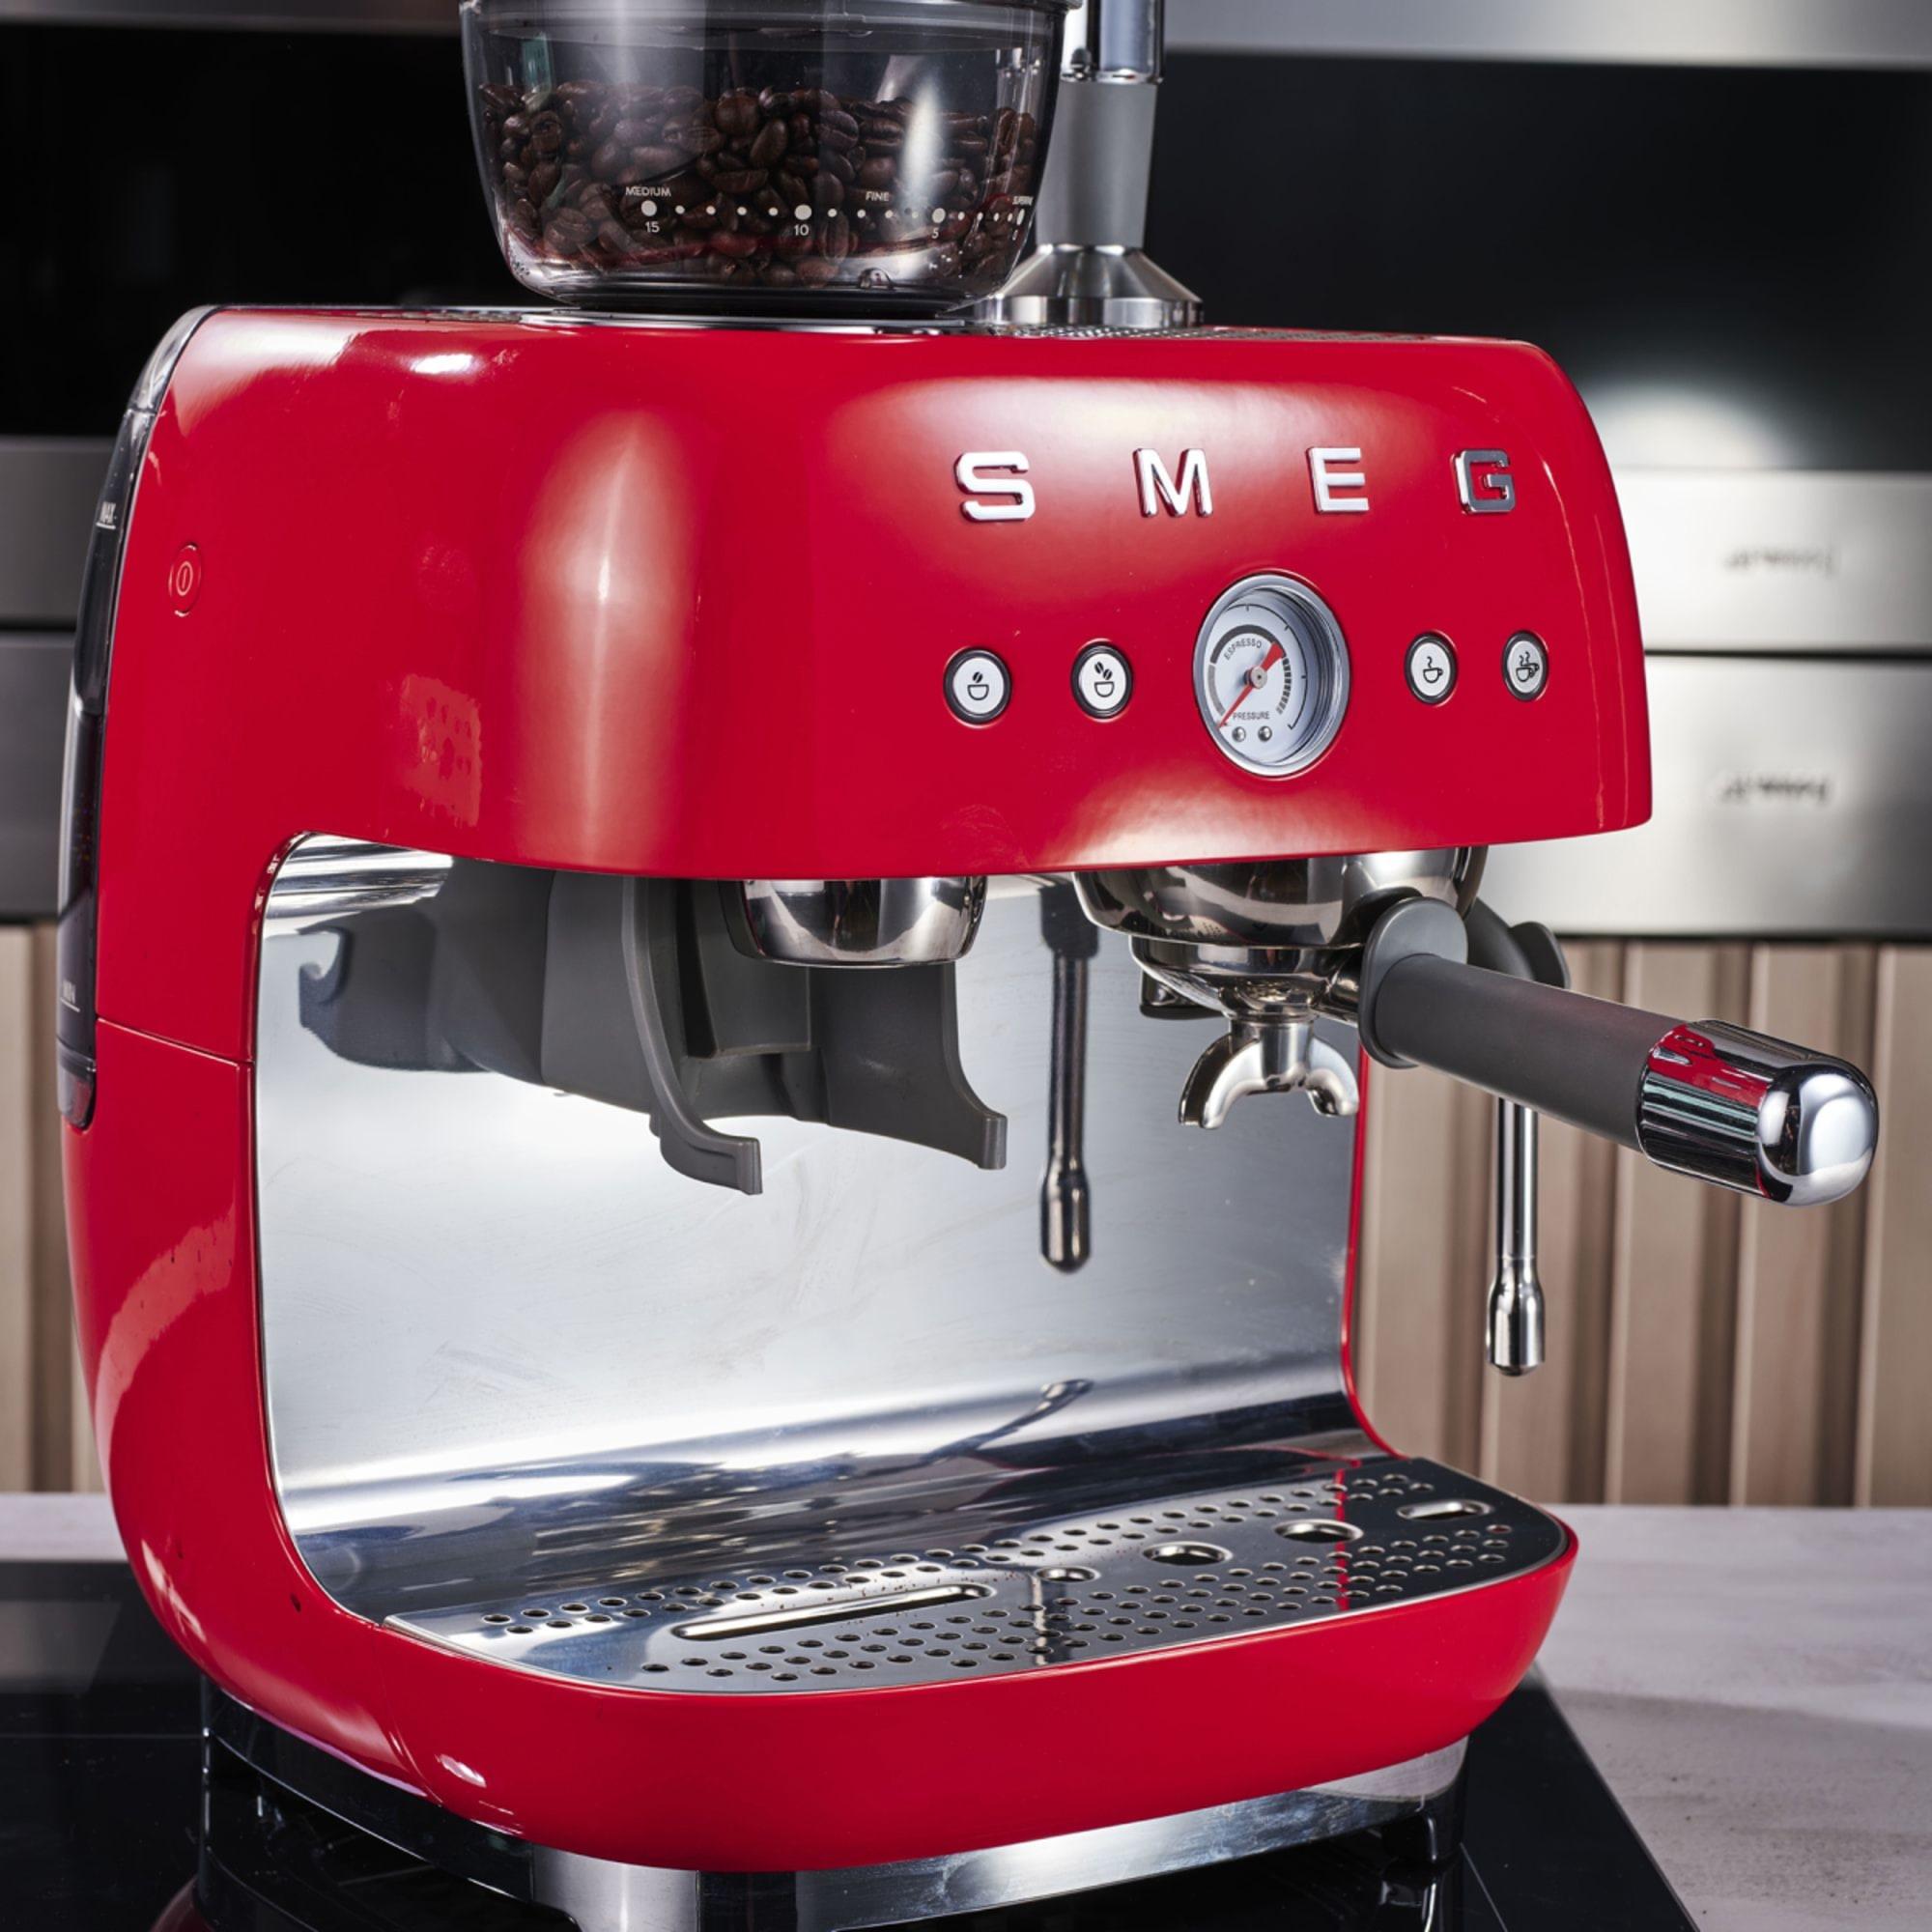 Smeg 50's Retro Style Espresso Machine with Built In Grinder Red Image 15